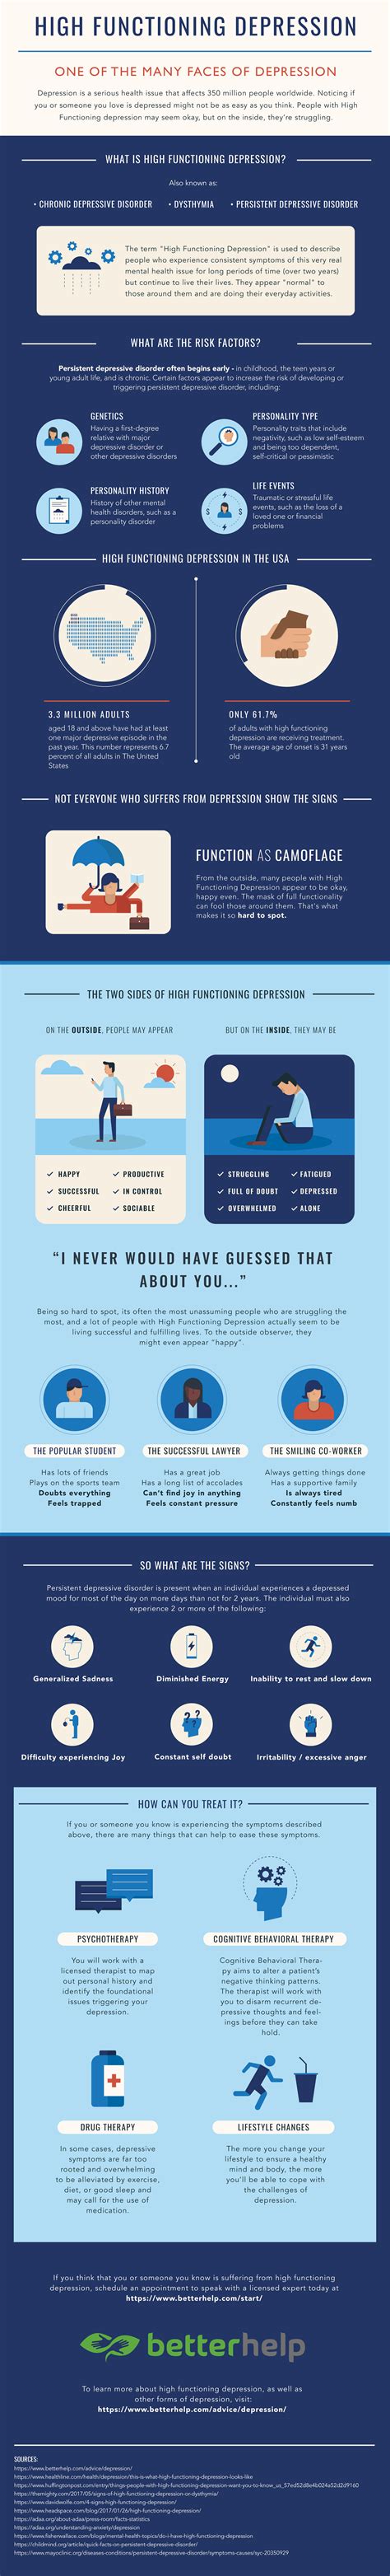 Infographic about High Functioning Depression - Don't Stigmatize me